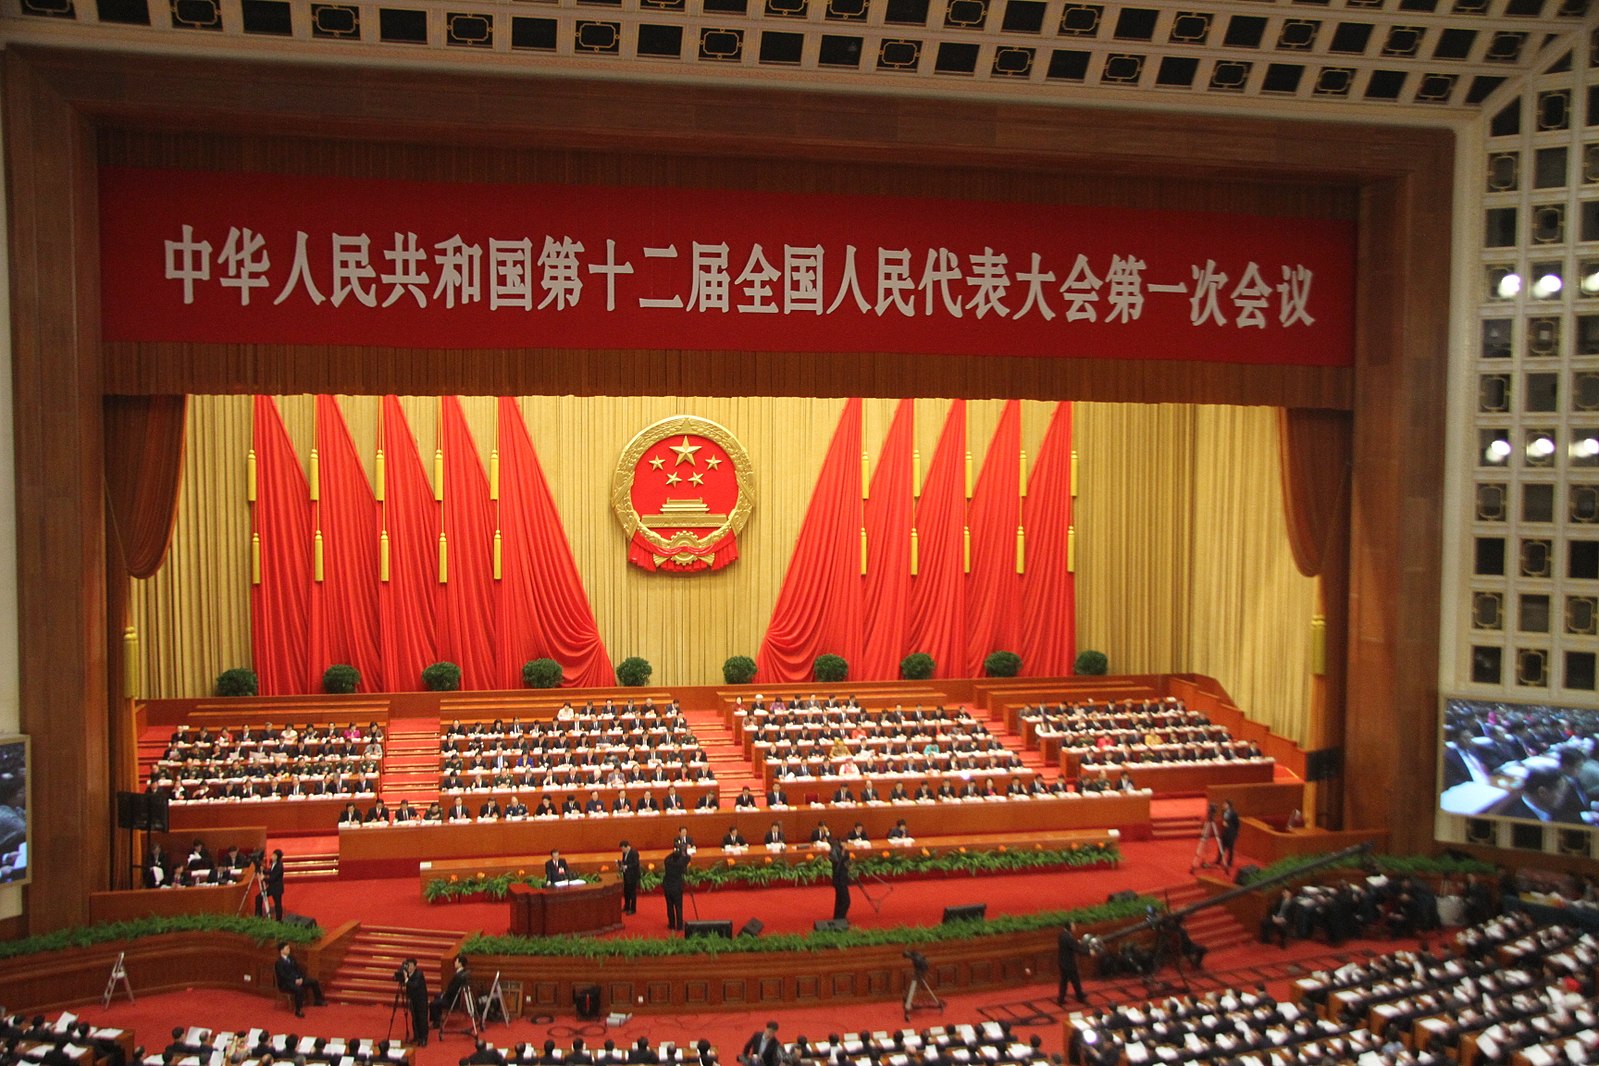 Picture of the front of the National People's Congress Meeting Hall in Beijing, China with flags and symbols of the country.